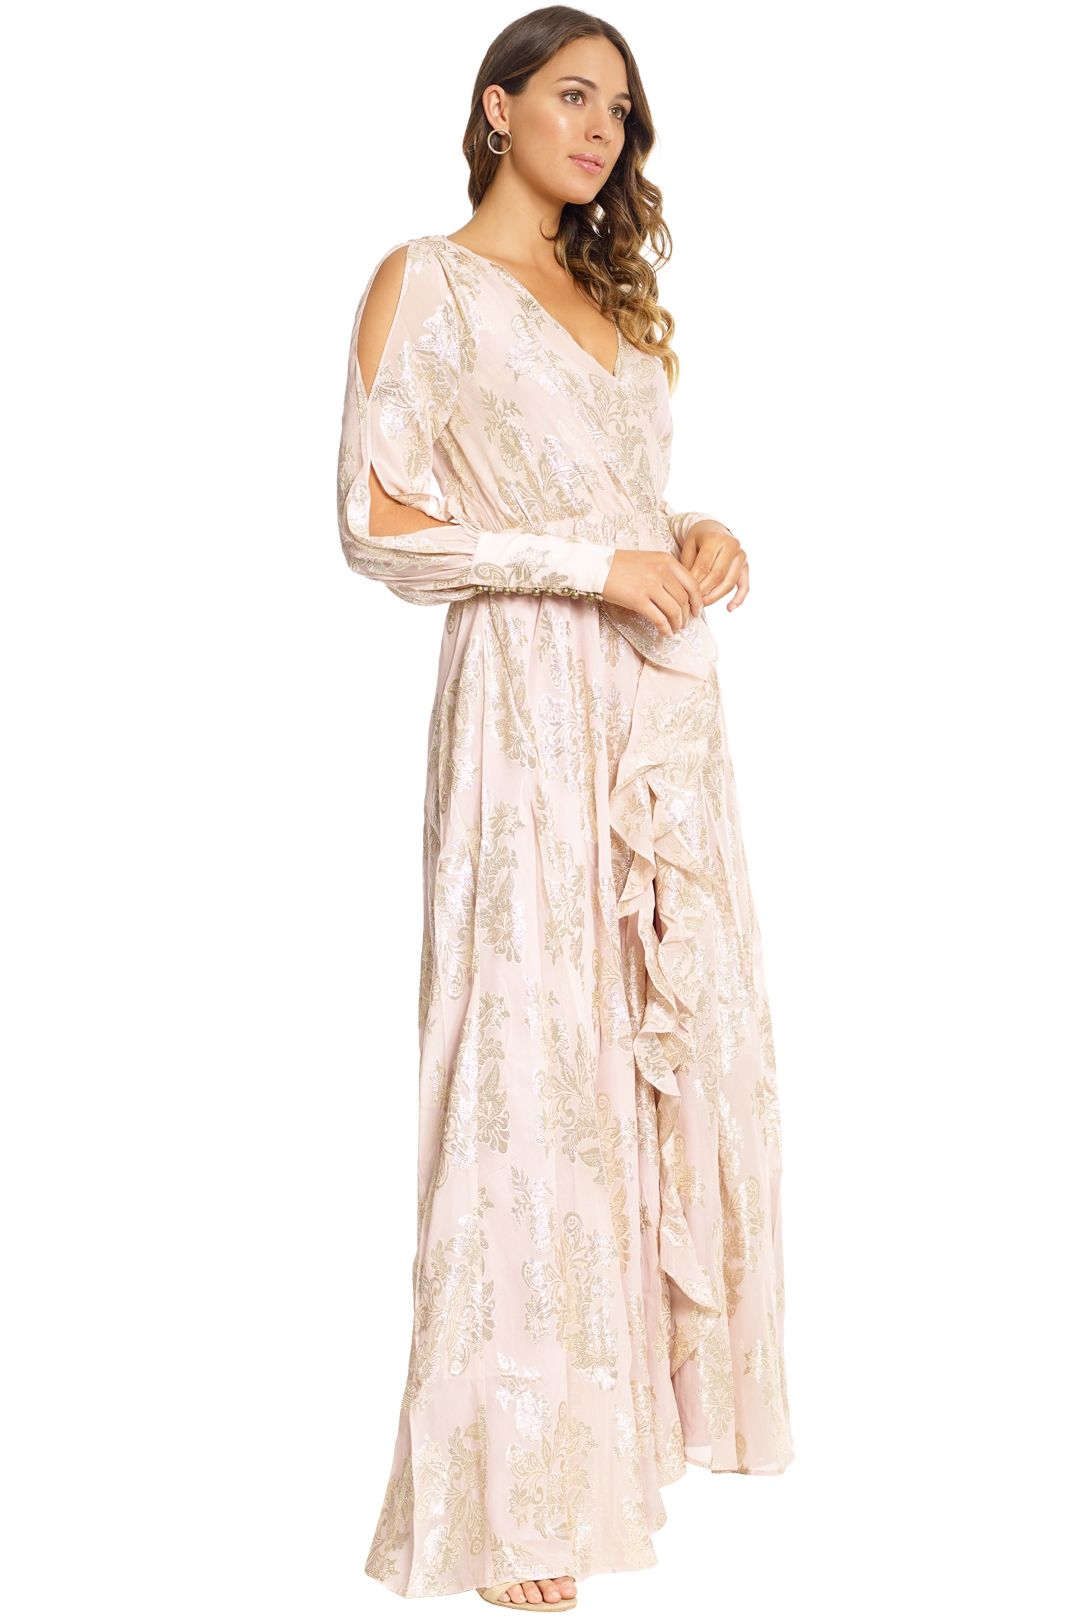 We Are Kindred - Lotus Maxi Dress - Blush - Side